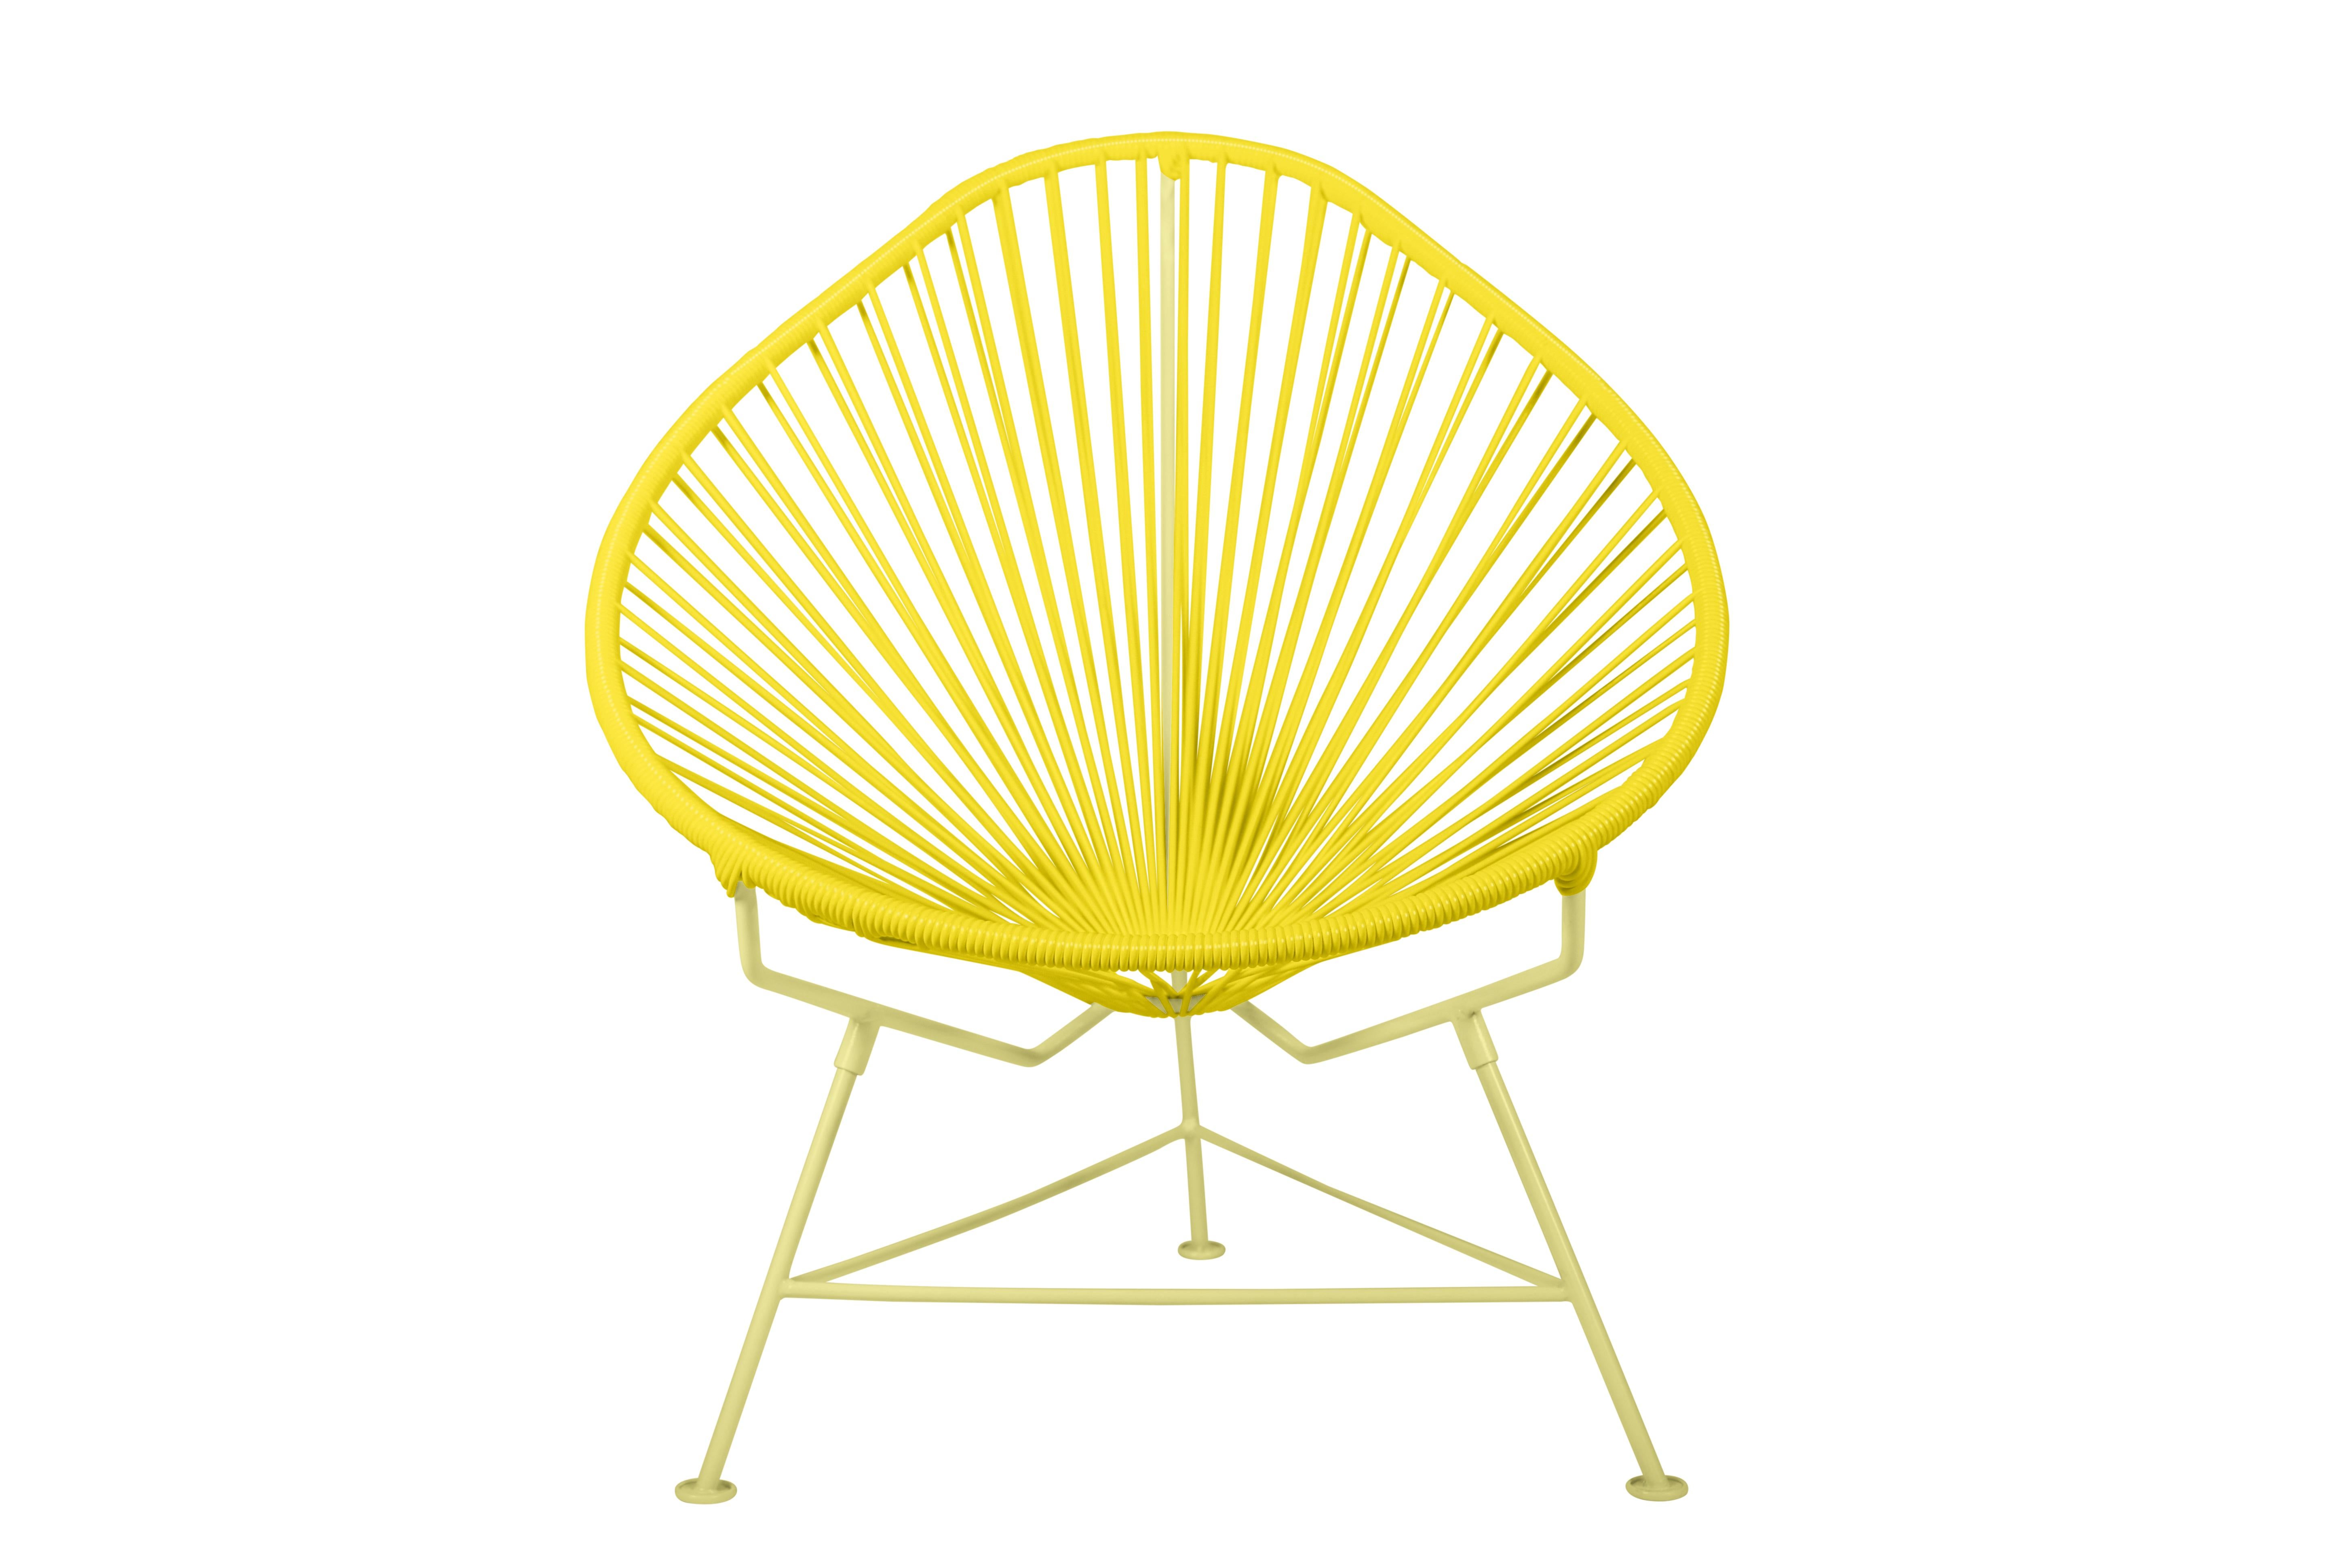 In 2009 Innit introduced the Acapulco Chair to design junkies around the world in 2009.  It has since become a renowned design classic and is featured in hot mags, incredible interiors, and lavish landscapes from Beverly Hills to Melbourne and